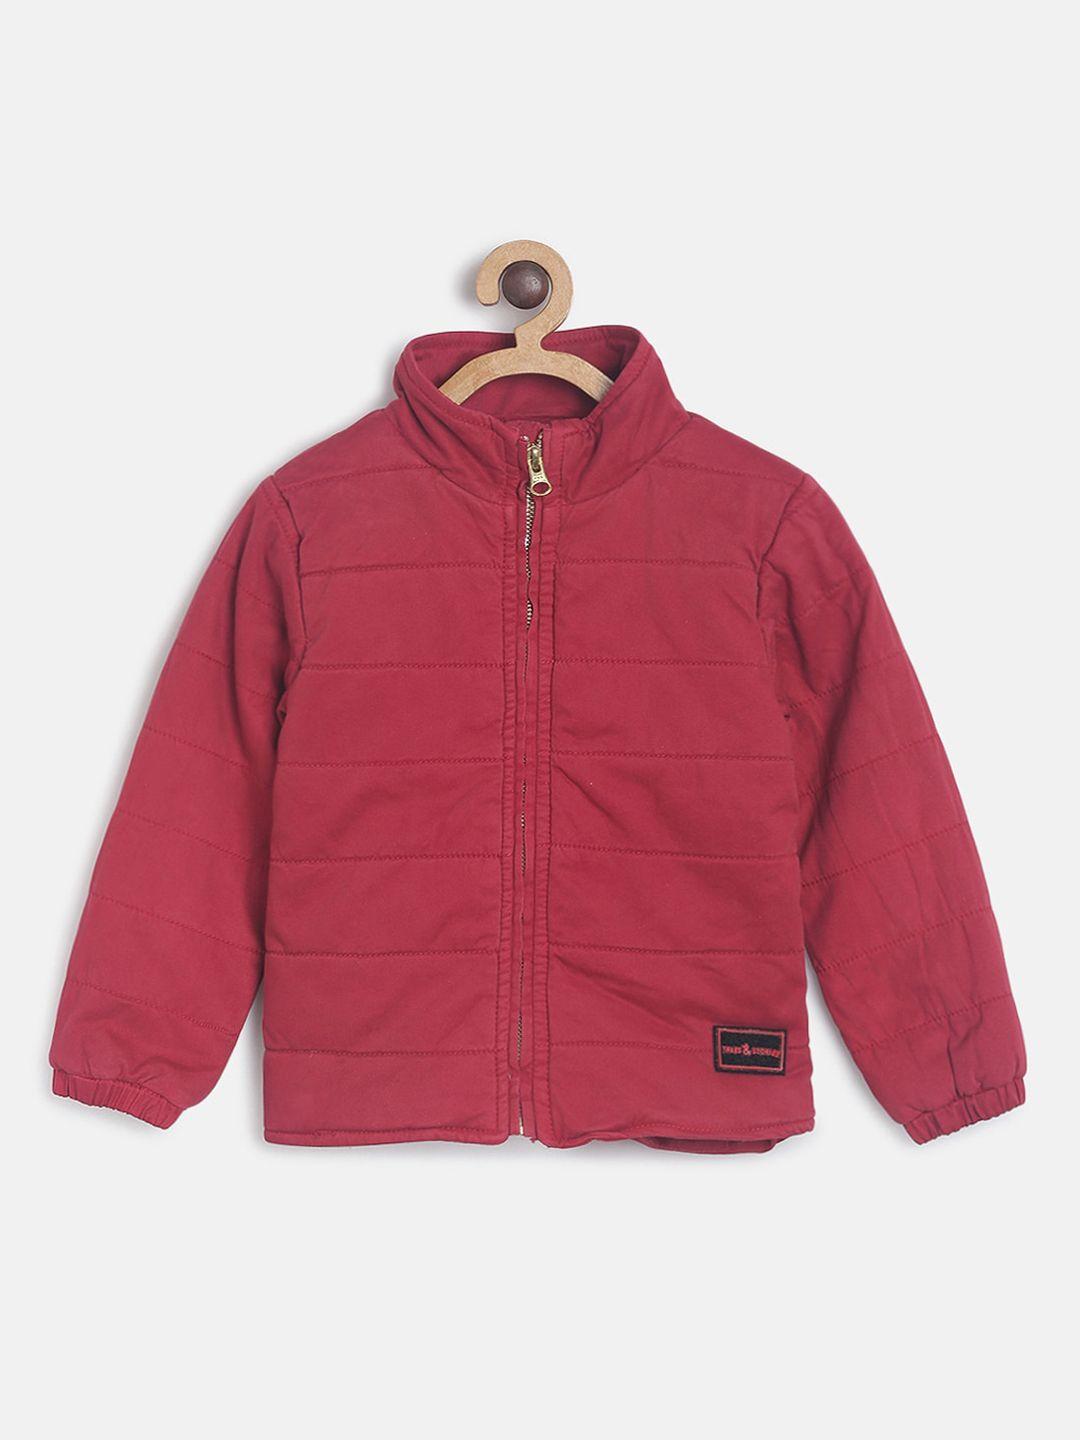 TALES & STORIES Boys Red Solid Padded Jacket